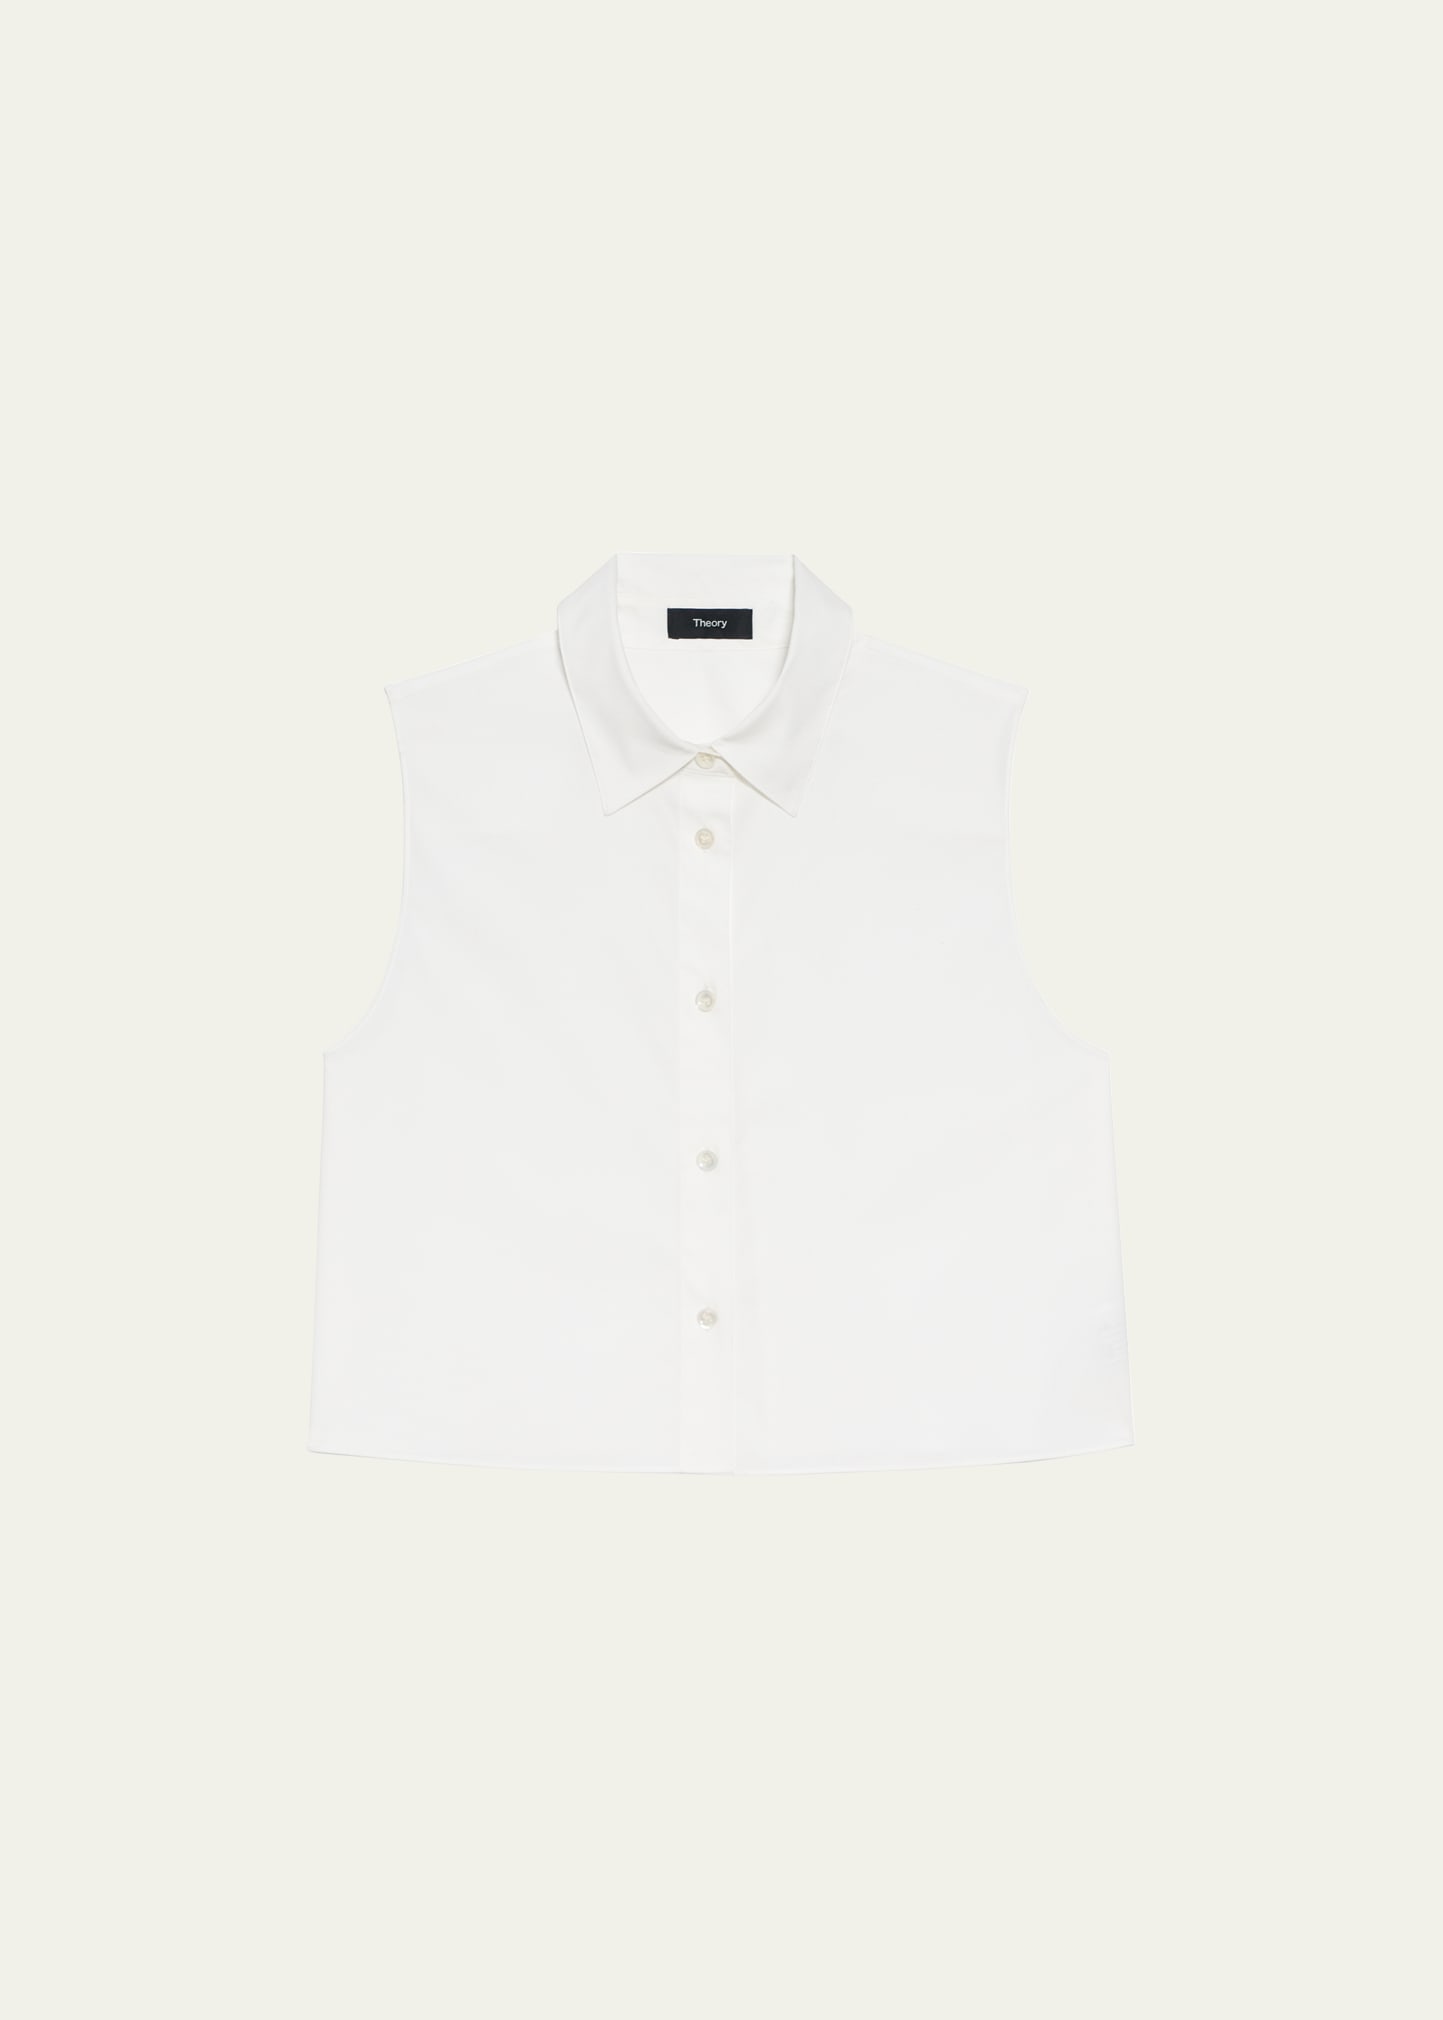 Theory Cropped Sleeveless Cotton Shirt In White